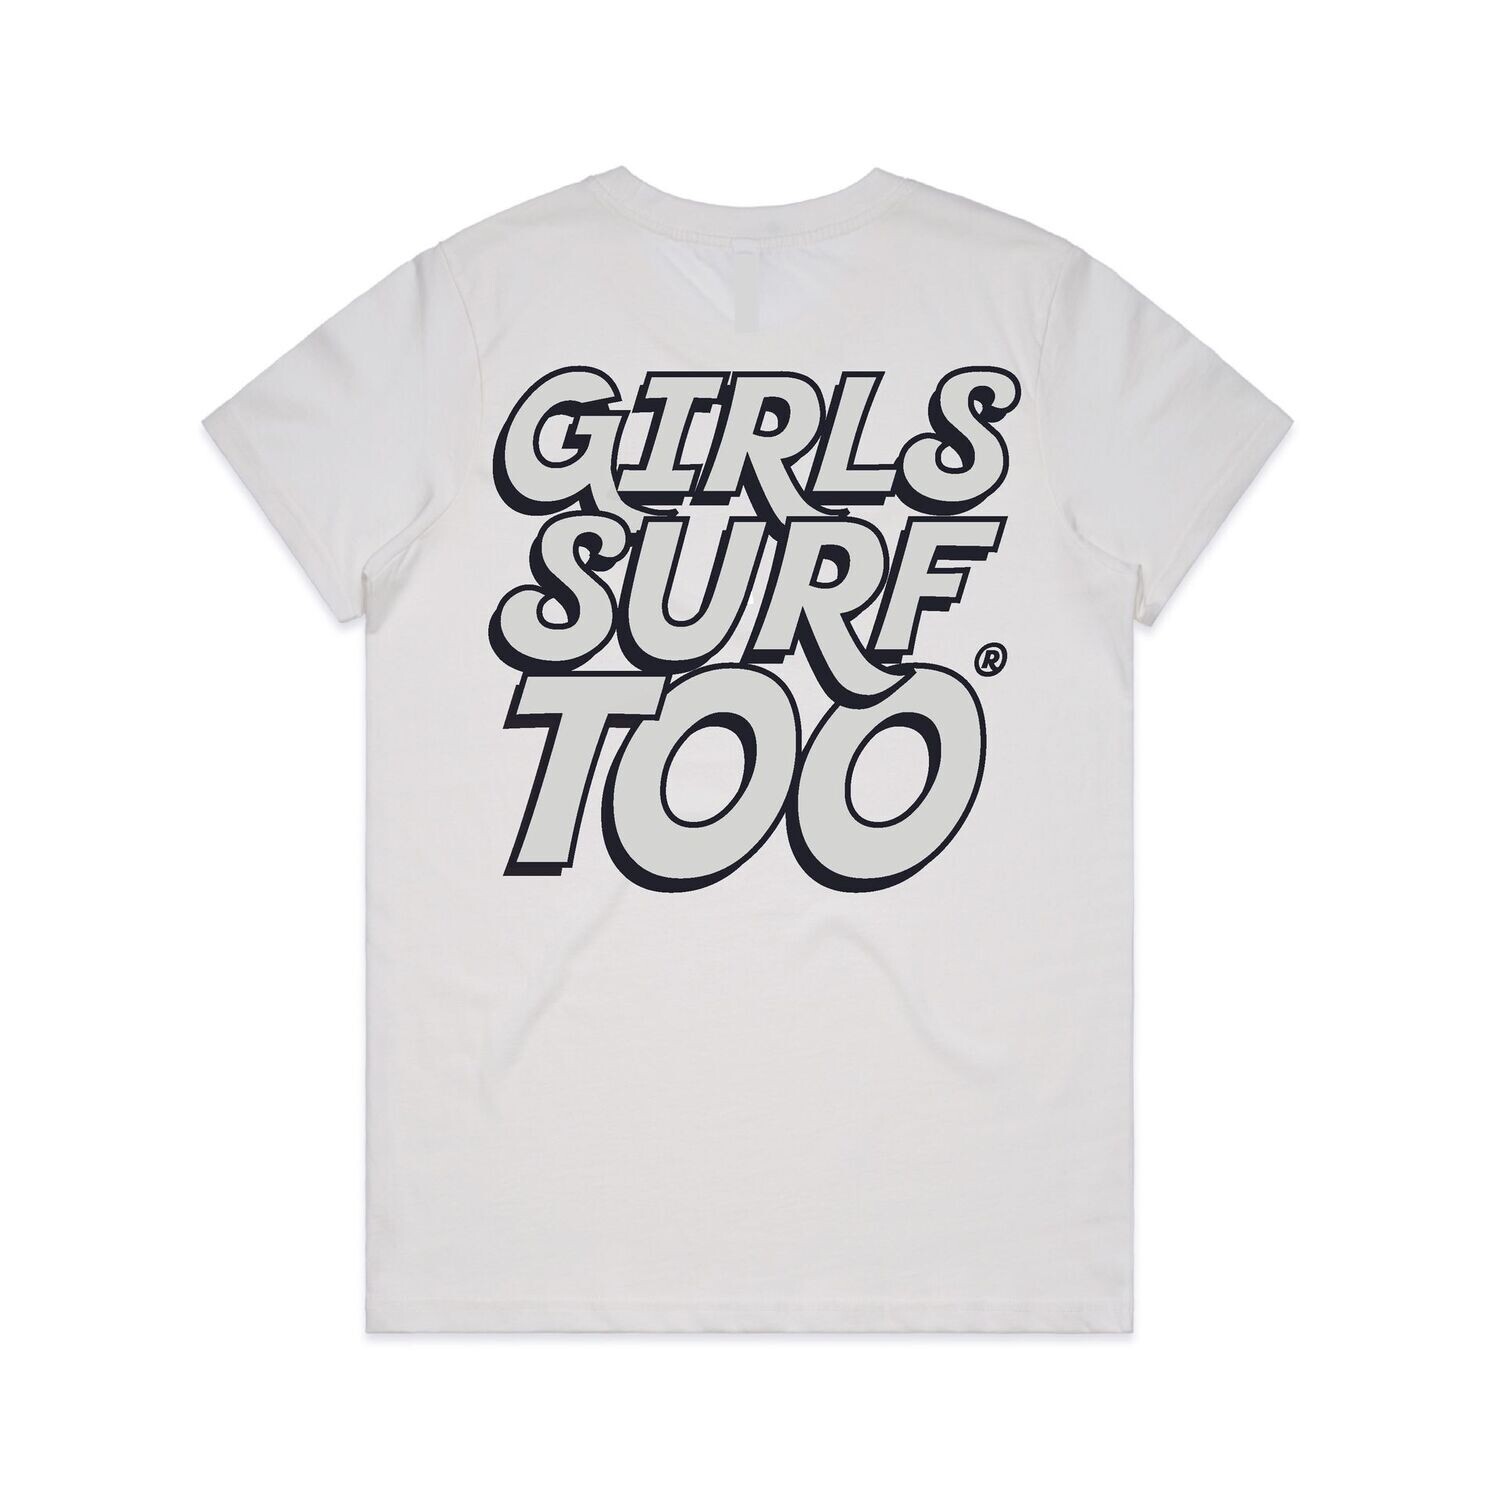 ​GIRLS SURF TOO® The Iconic Tee